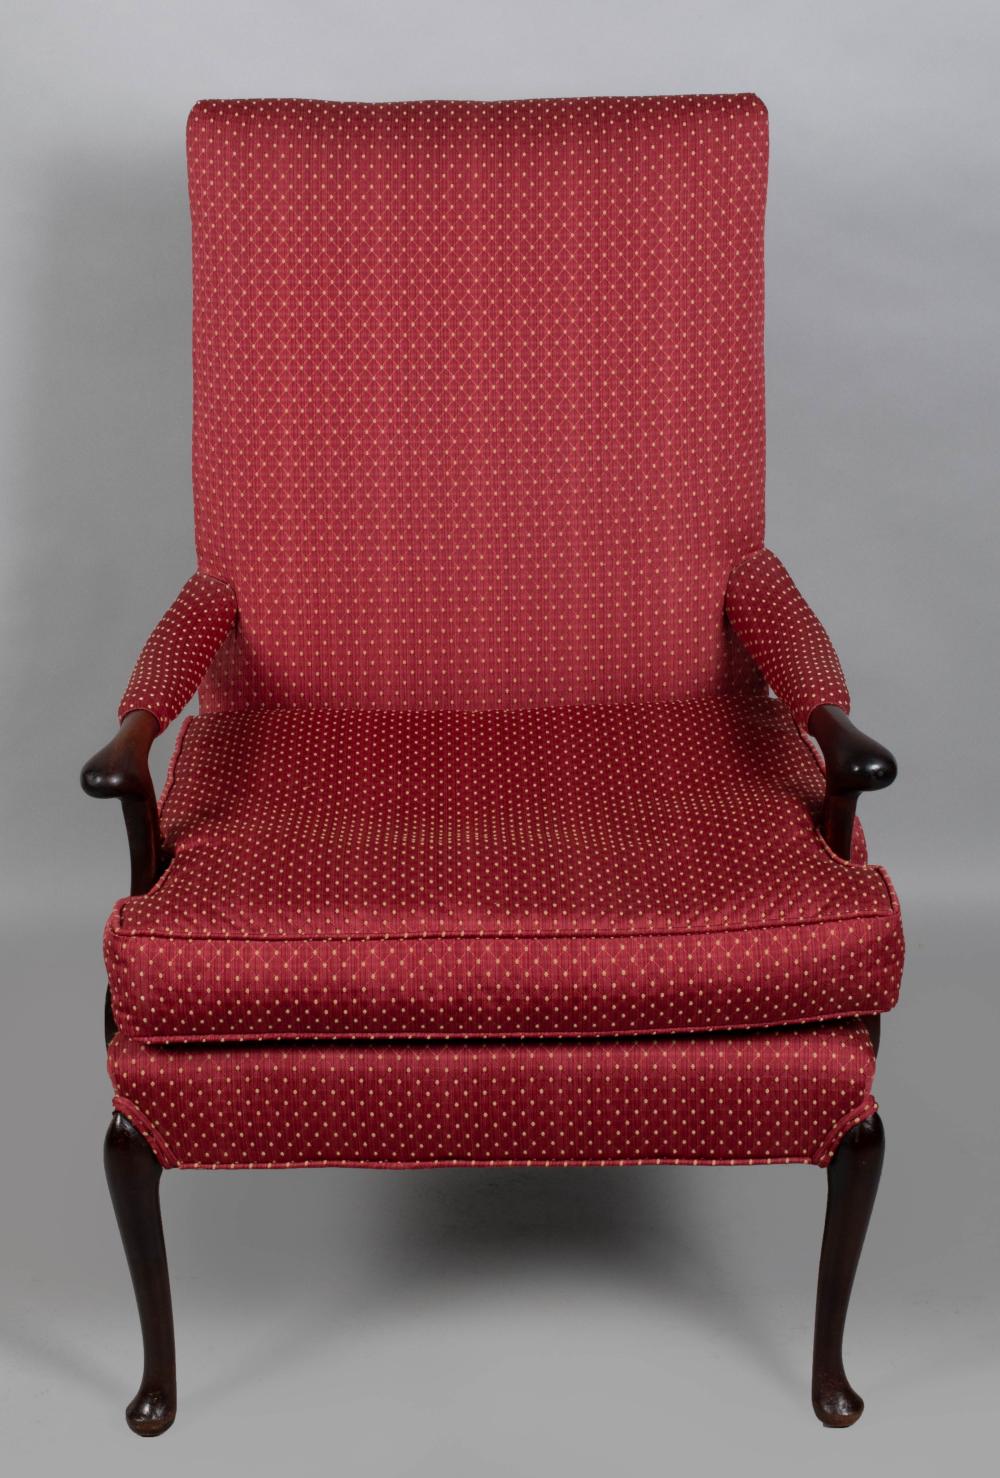 QUEEN ANNE STYLE MAHOGANY ARMCHAIR 33d2d9